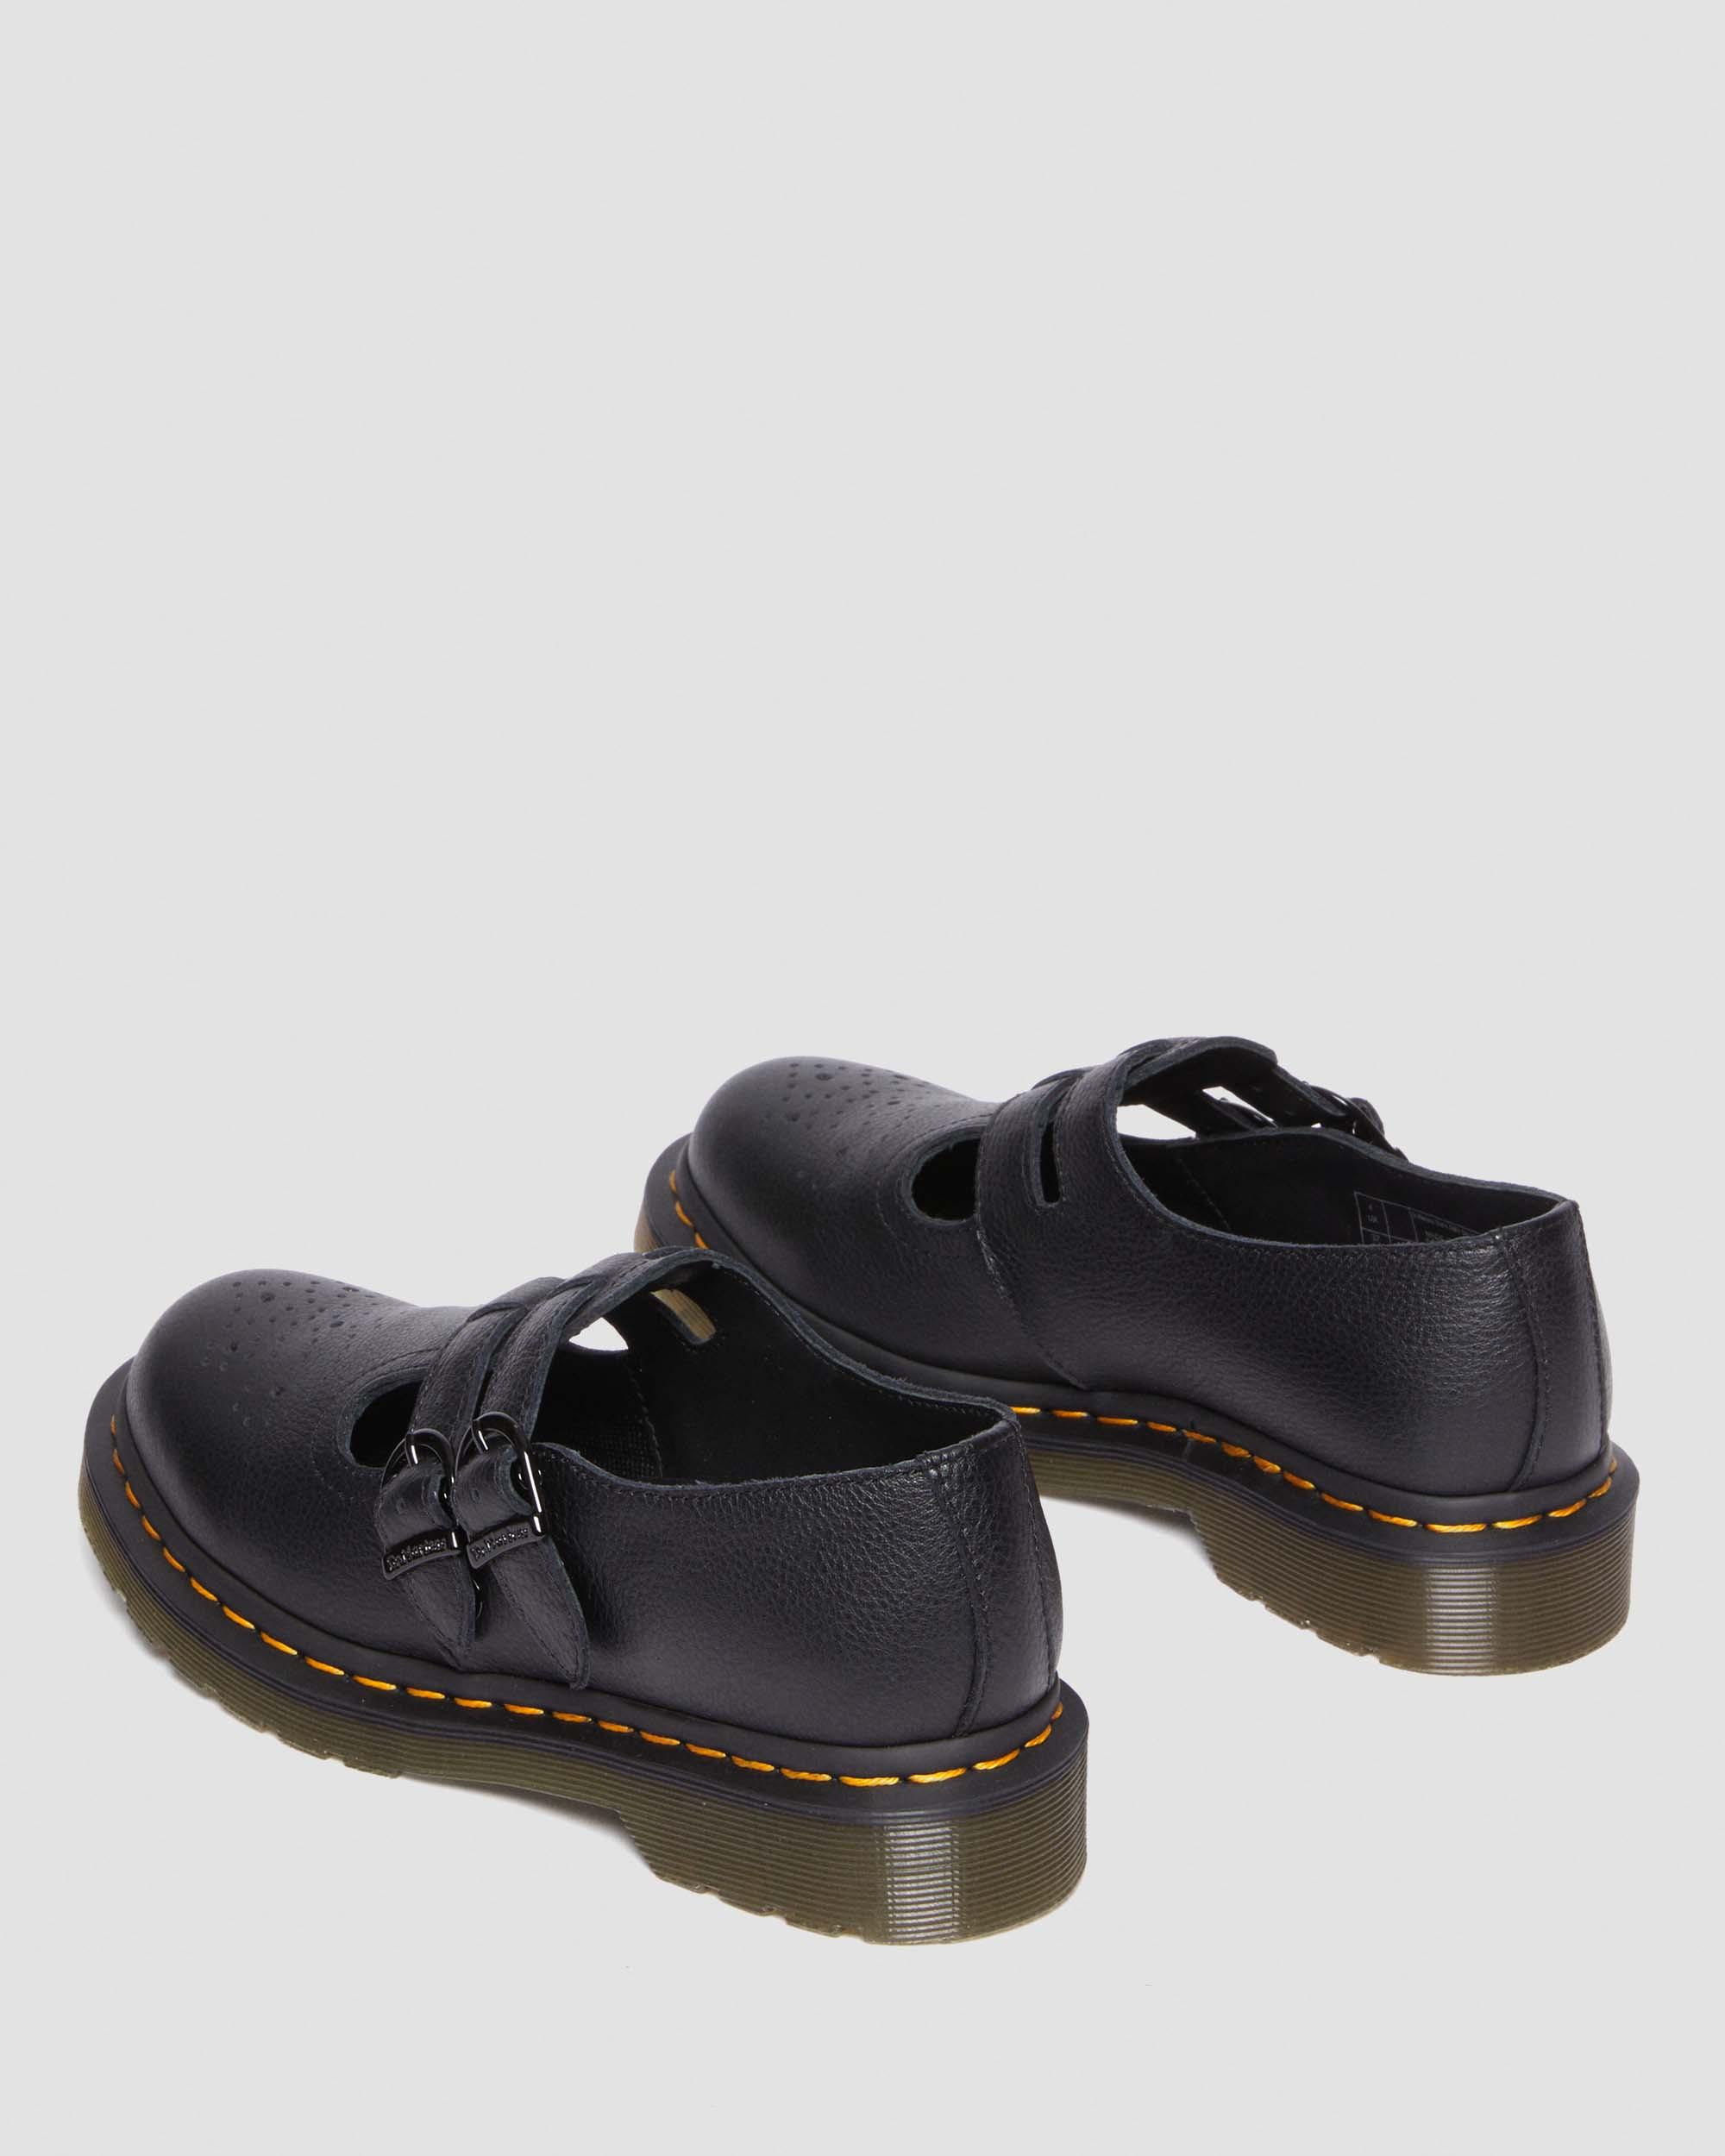 8065 Mary Jane Virginia Leather Shoes in Black